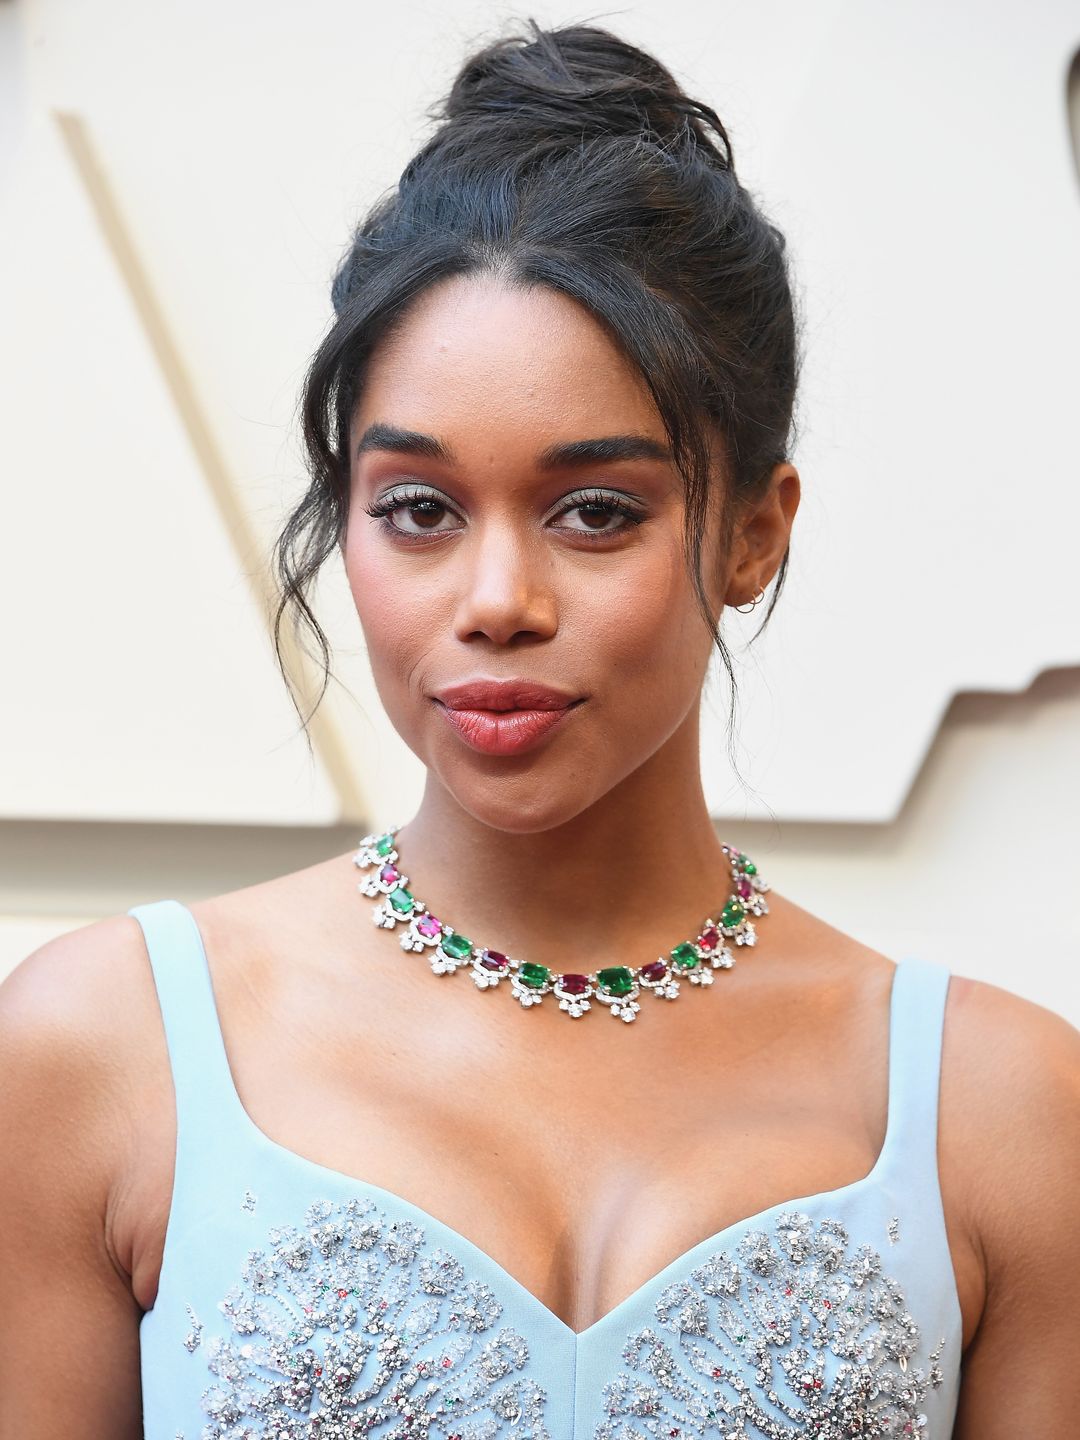 HOLLYWOOD, CA - FEBRUARY 24:  Laura Harrier attends the 91st Annual Academy Awards at Hollywood and Highland on February 24, 2019 in Hollywood, California.  (Photo by Steve Granitz/WireImage)